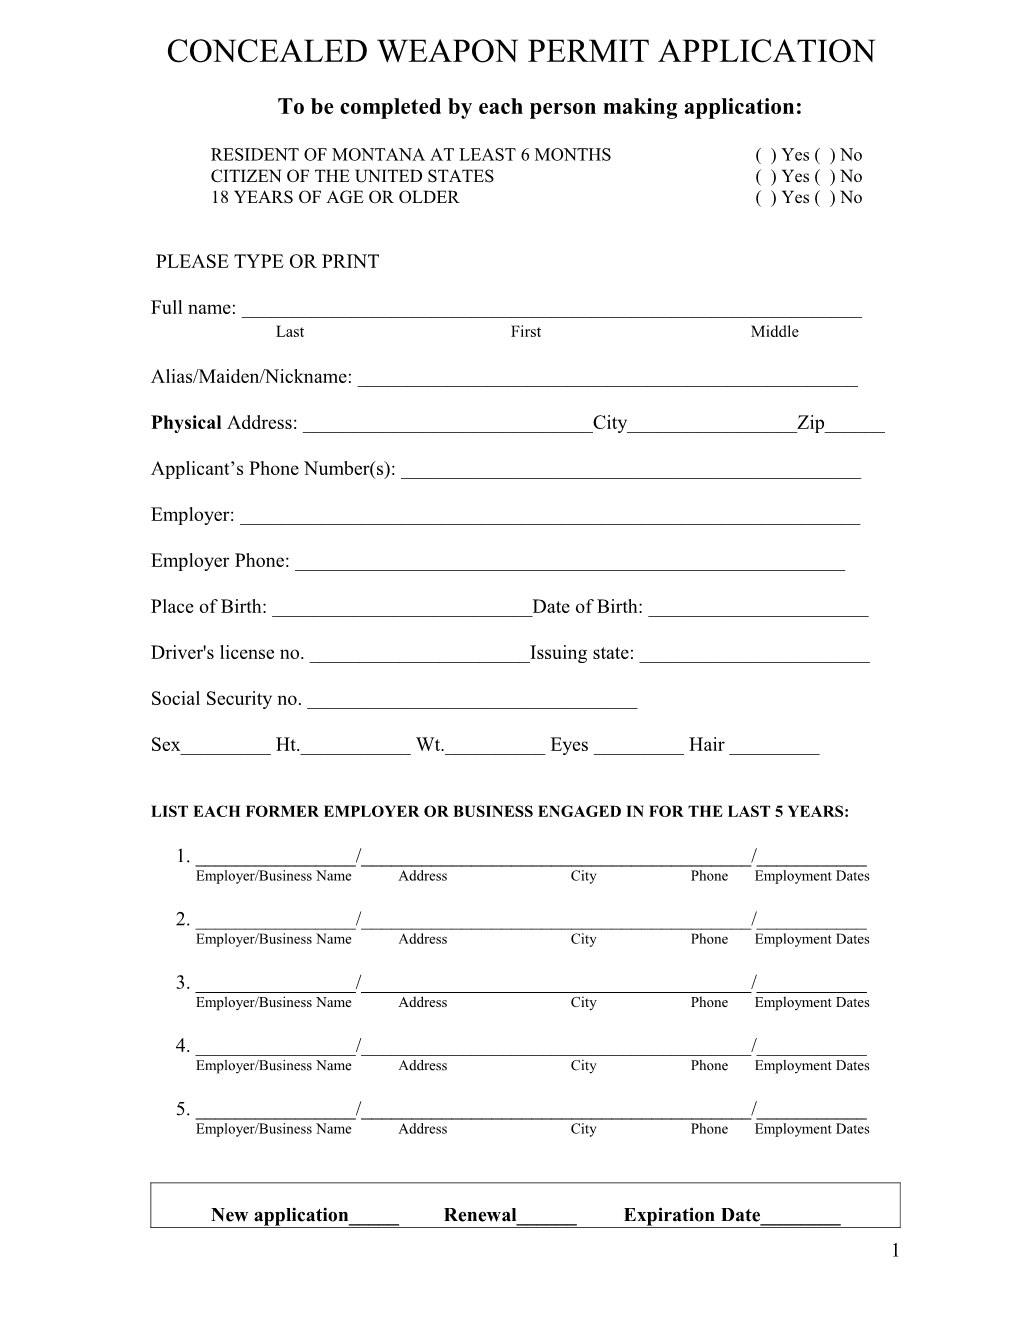 Concealed Weapon Permit Application